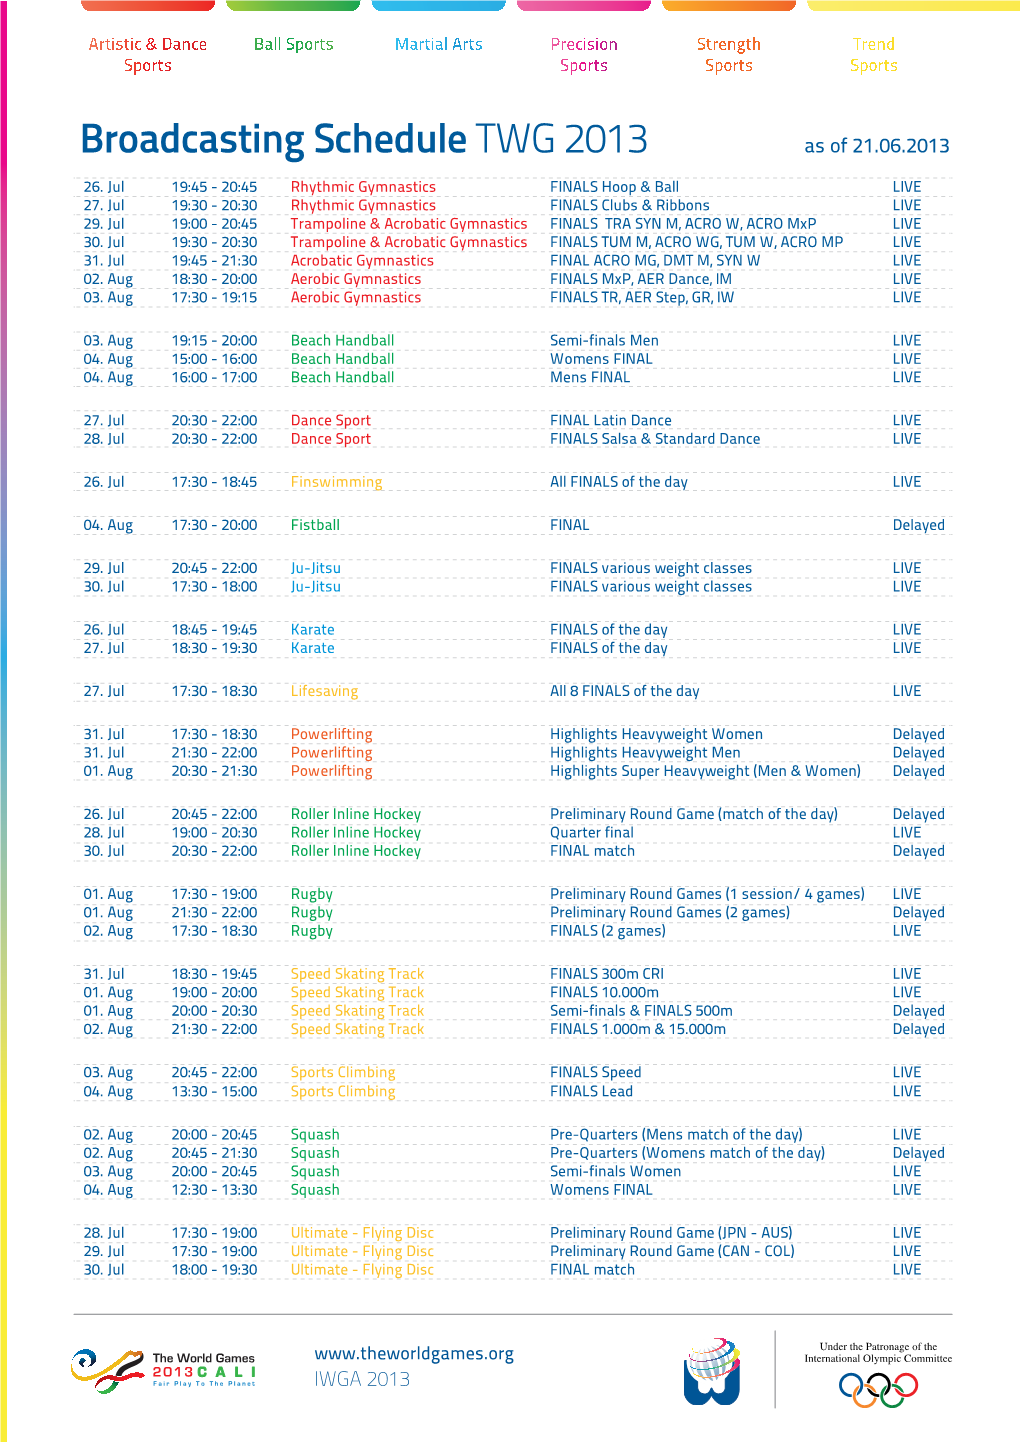 Broadcasting Schedule TWG 2013 As of 21.06.2013